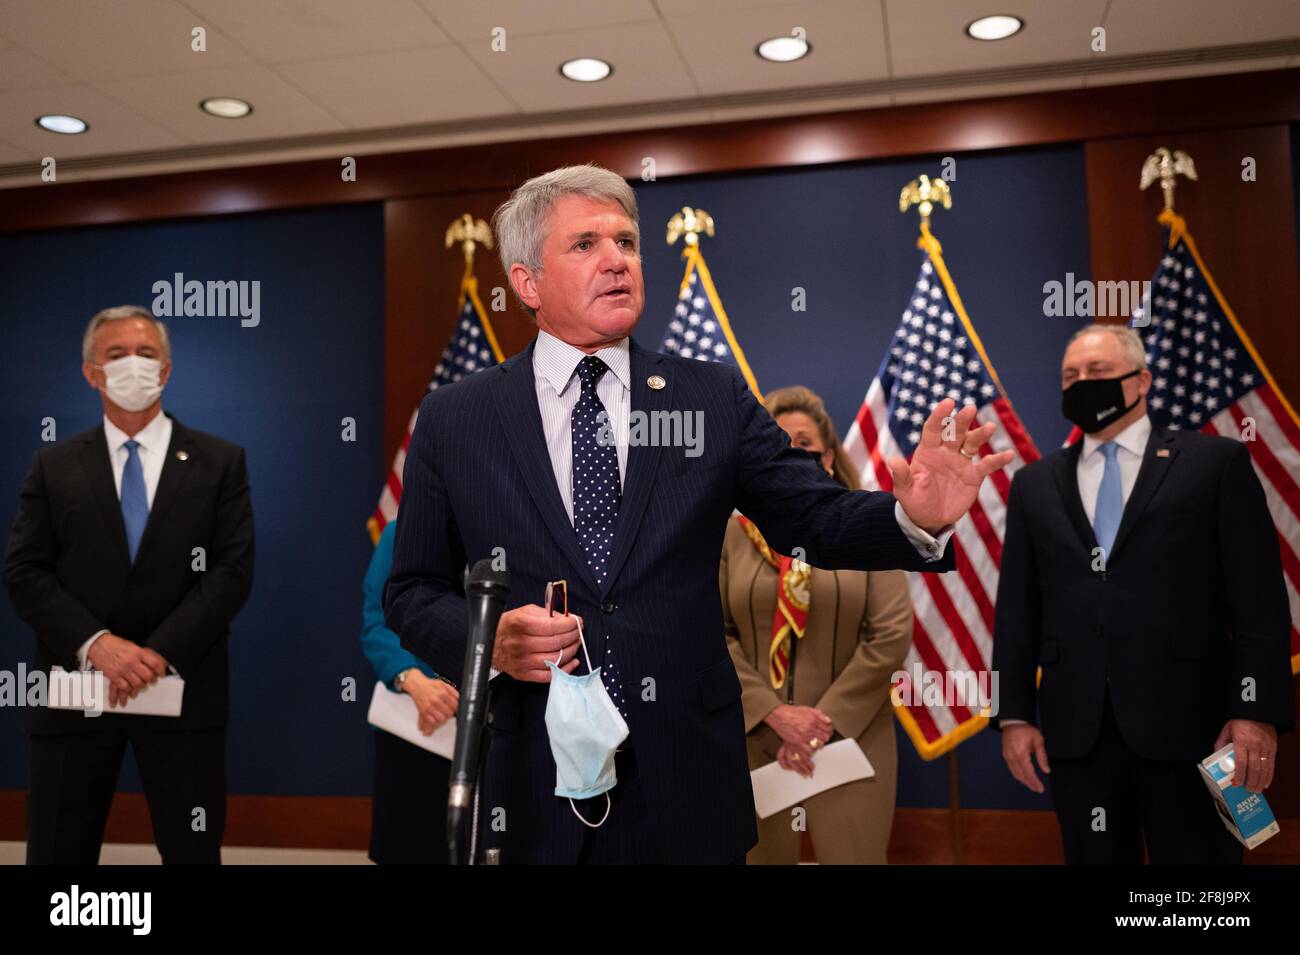 Washington, USA. 14th Apr, 2021. Representative Michael McCaul (R-TX) during a House Republican Leadership press conference, at the U.S. Capitol in Washington, DC, on Wednesday, April 14, 2021. Congressional pressure is mounting in Congress on President Biden Administration's immigration policies as negotiations continue over additional economic relief measures. (Graeme Sloan/Sipa USA) Credit: Sipa USA/Alamy Live News Stock Photo